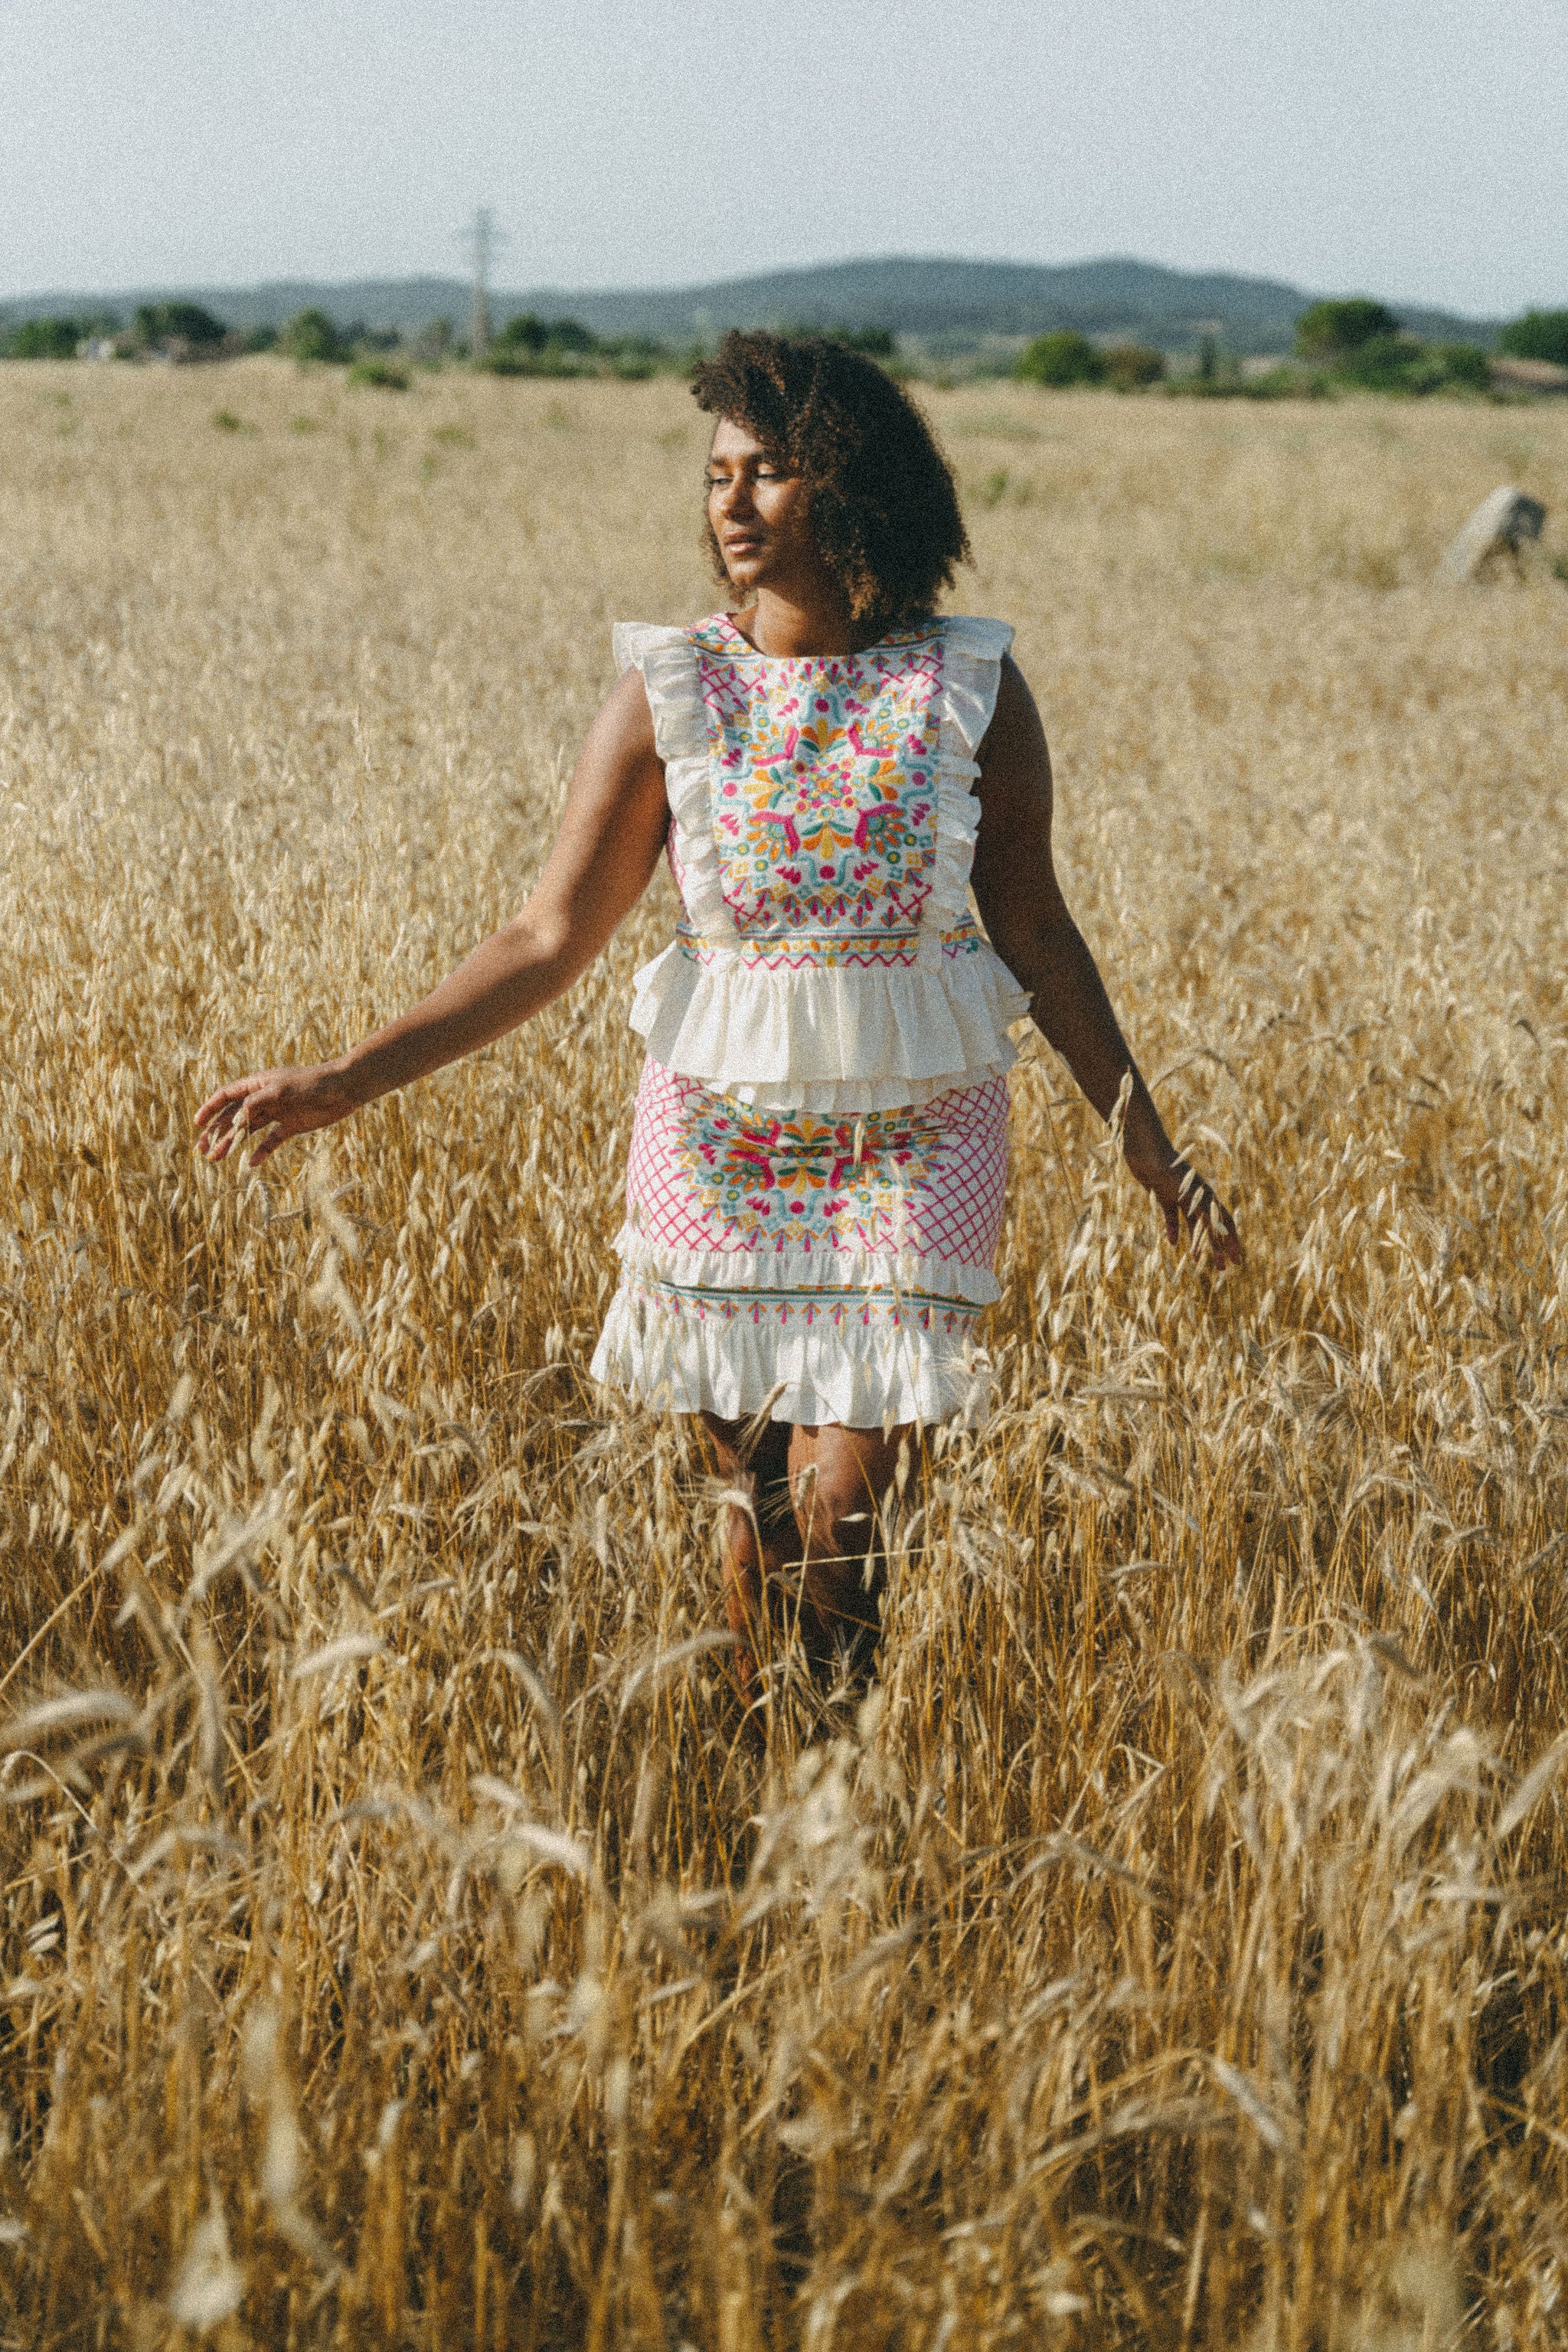 girl. field wearing embroidered frill top and skirt